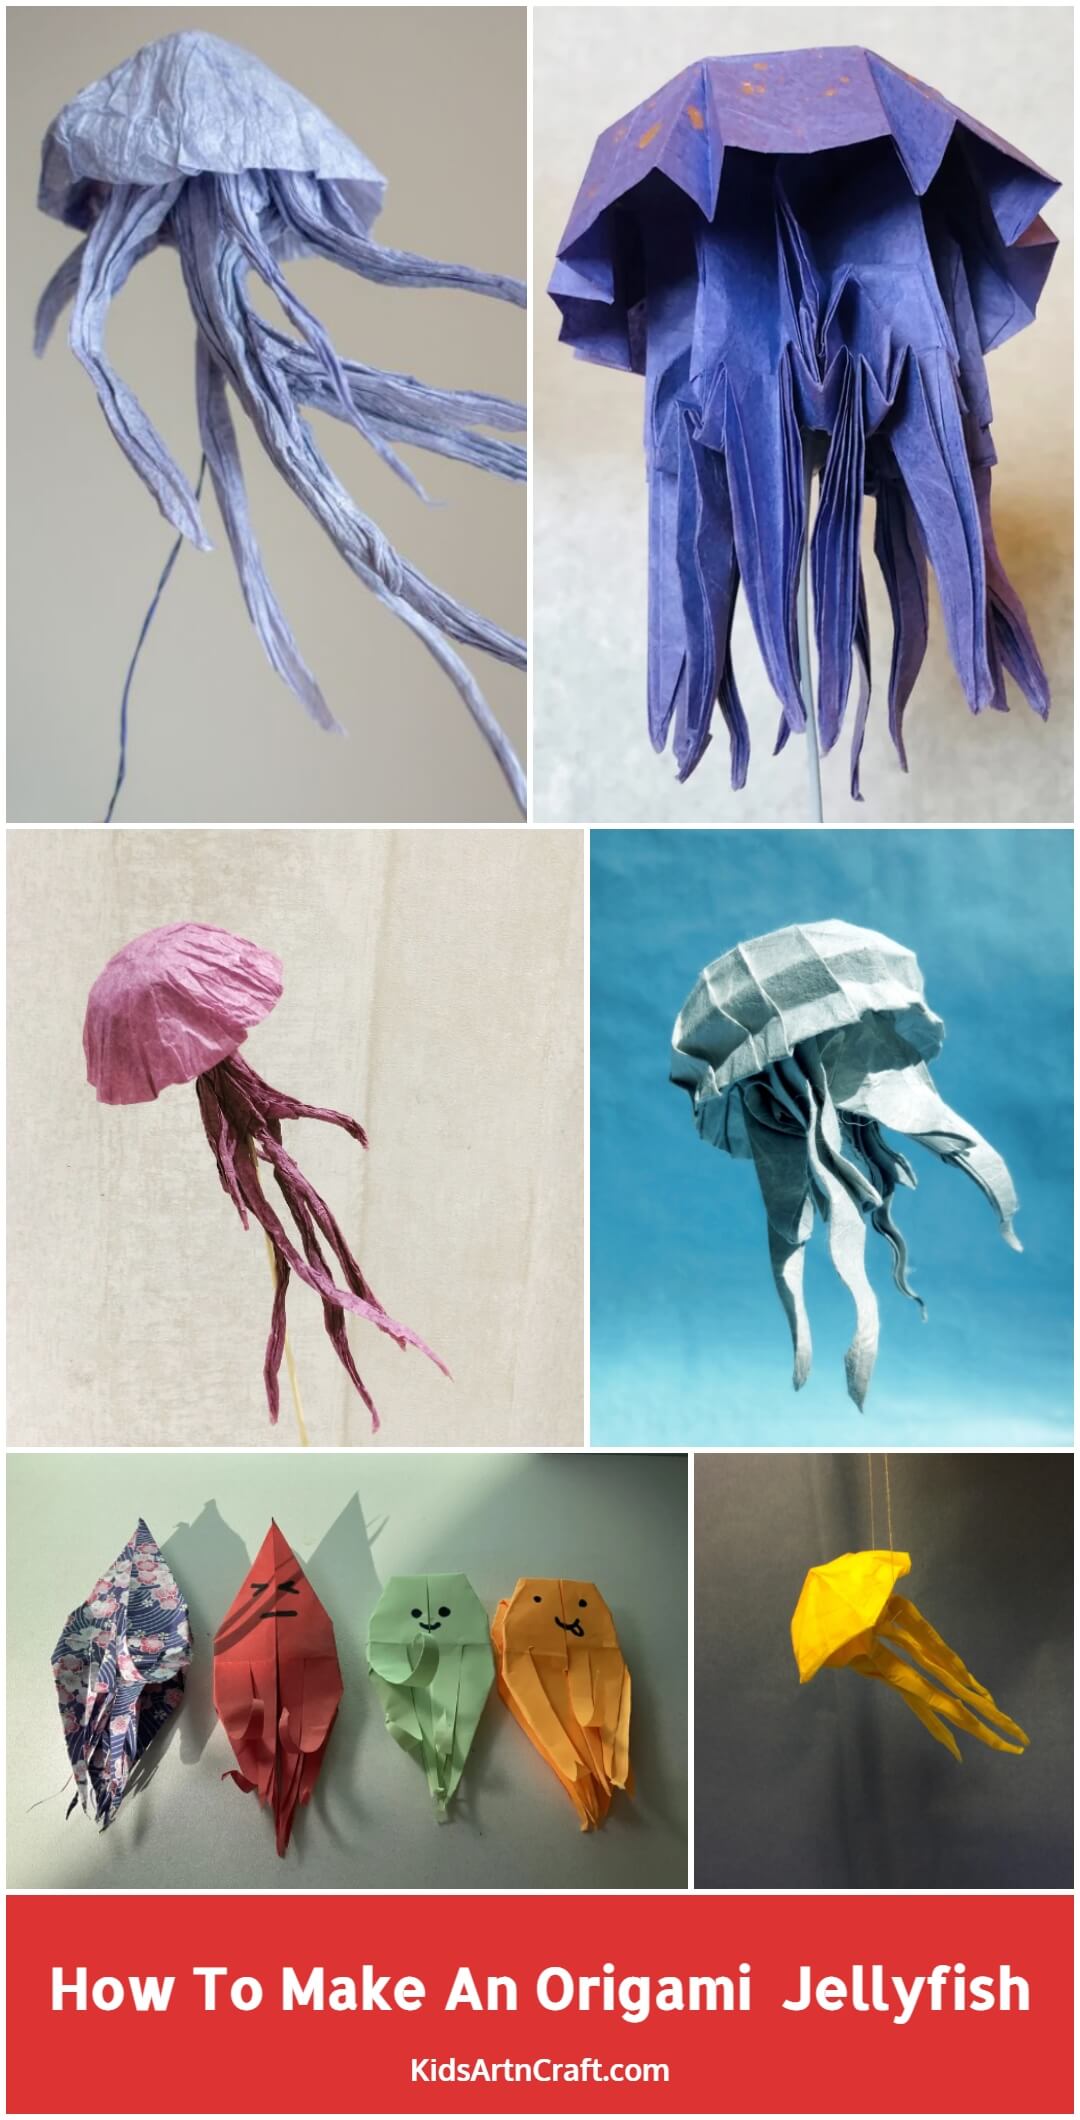 How To Make An Origami Jellyfish With Kids